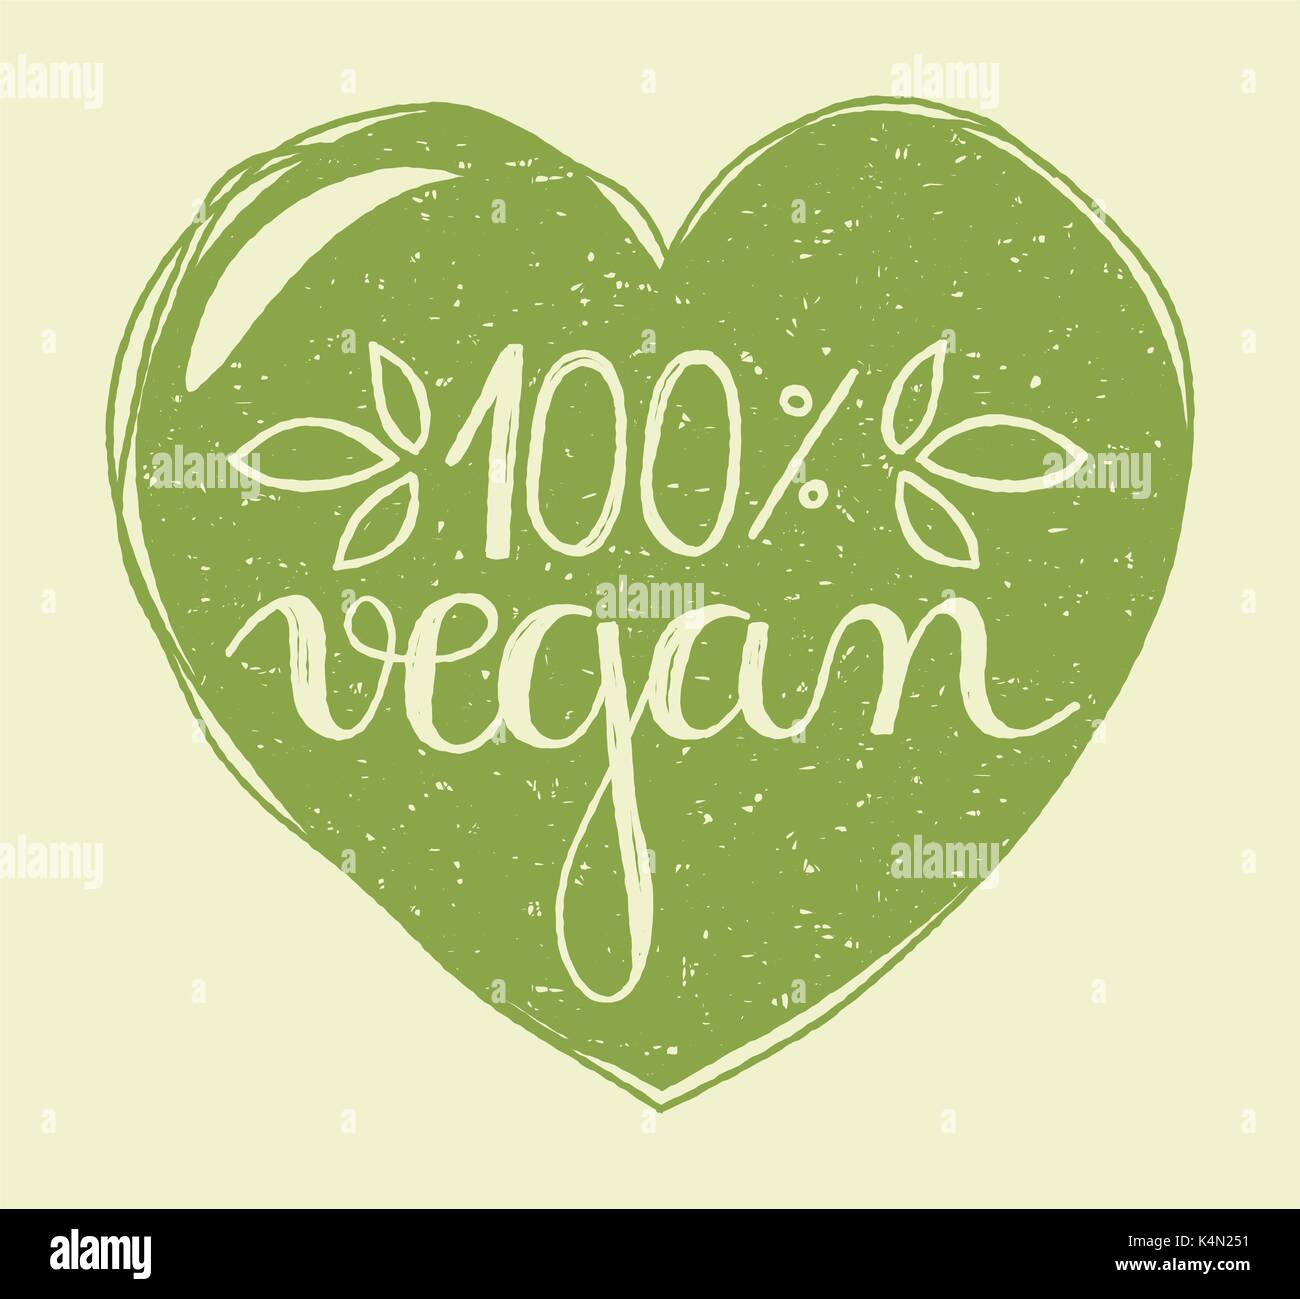 Hand lettering of the text 100 percent vegan in a hand drawn green heart with grunge stamp effect. Stock Vector